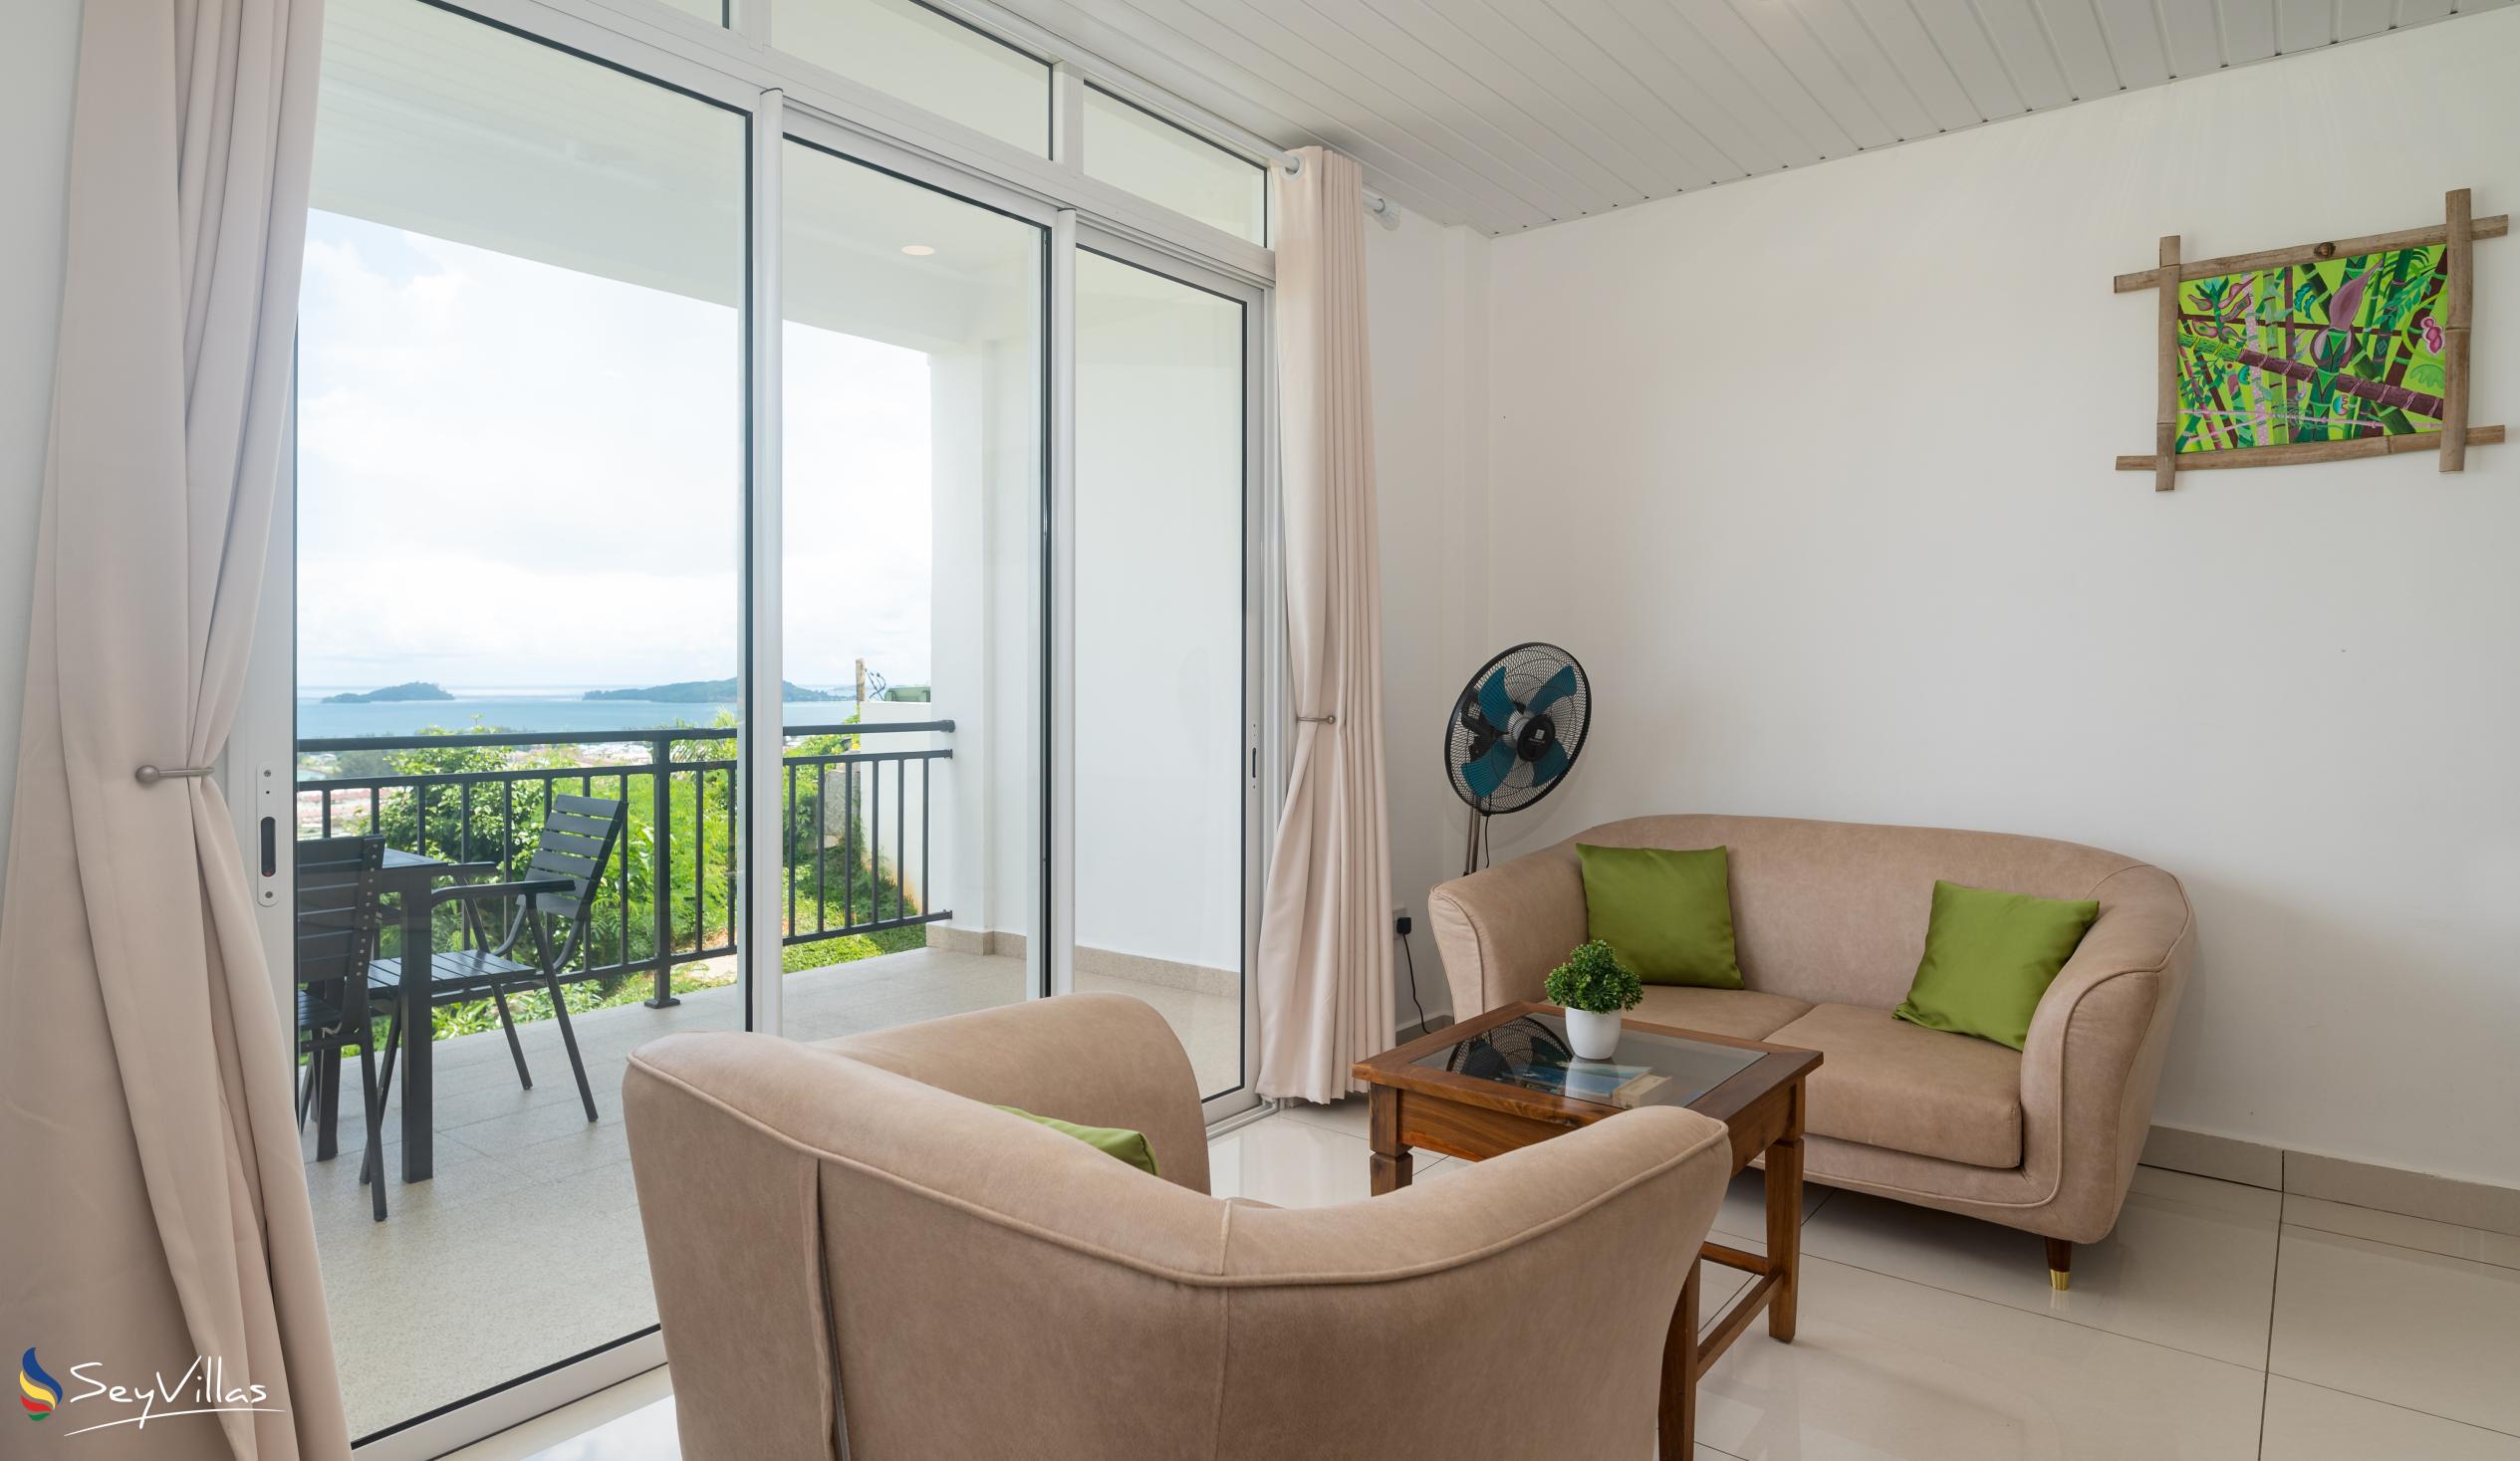 Photo 51: Creole Pearl Self Catering - 1-Bedroom Apartment - Mahé (Seychelles)